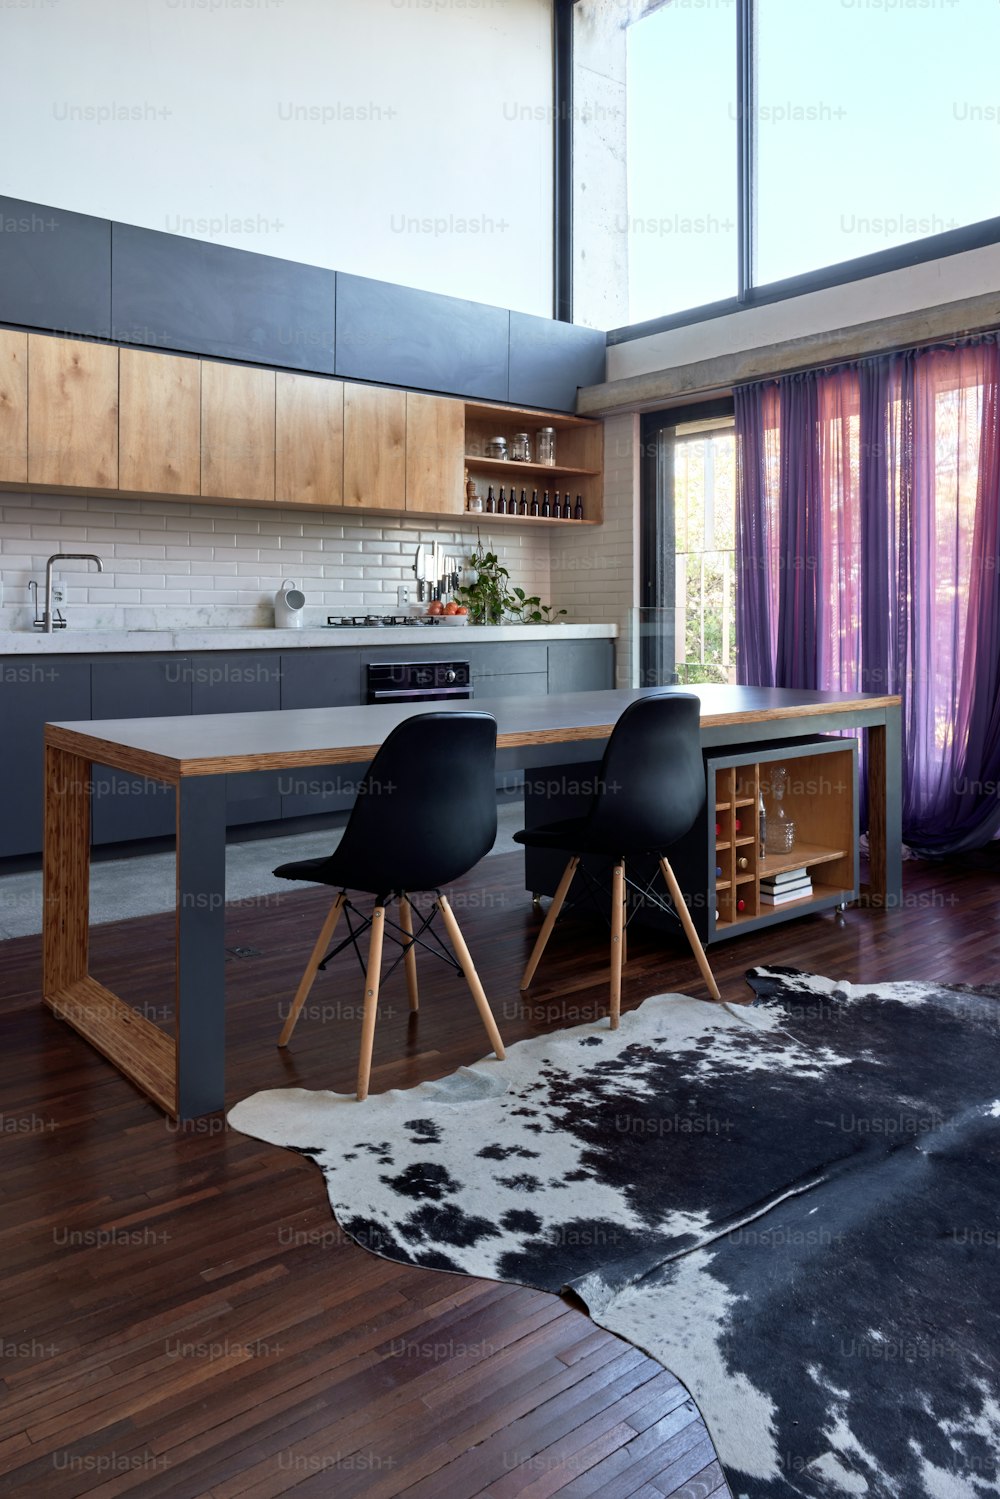 a kitchen area with a table, chairs, and a cow hide rug